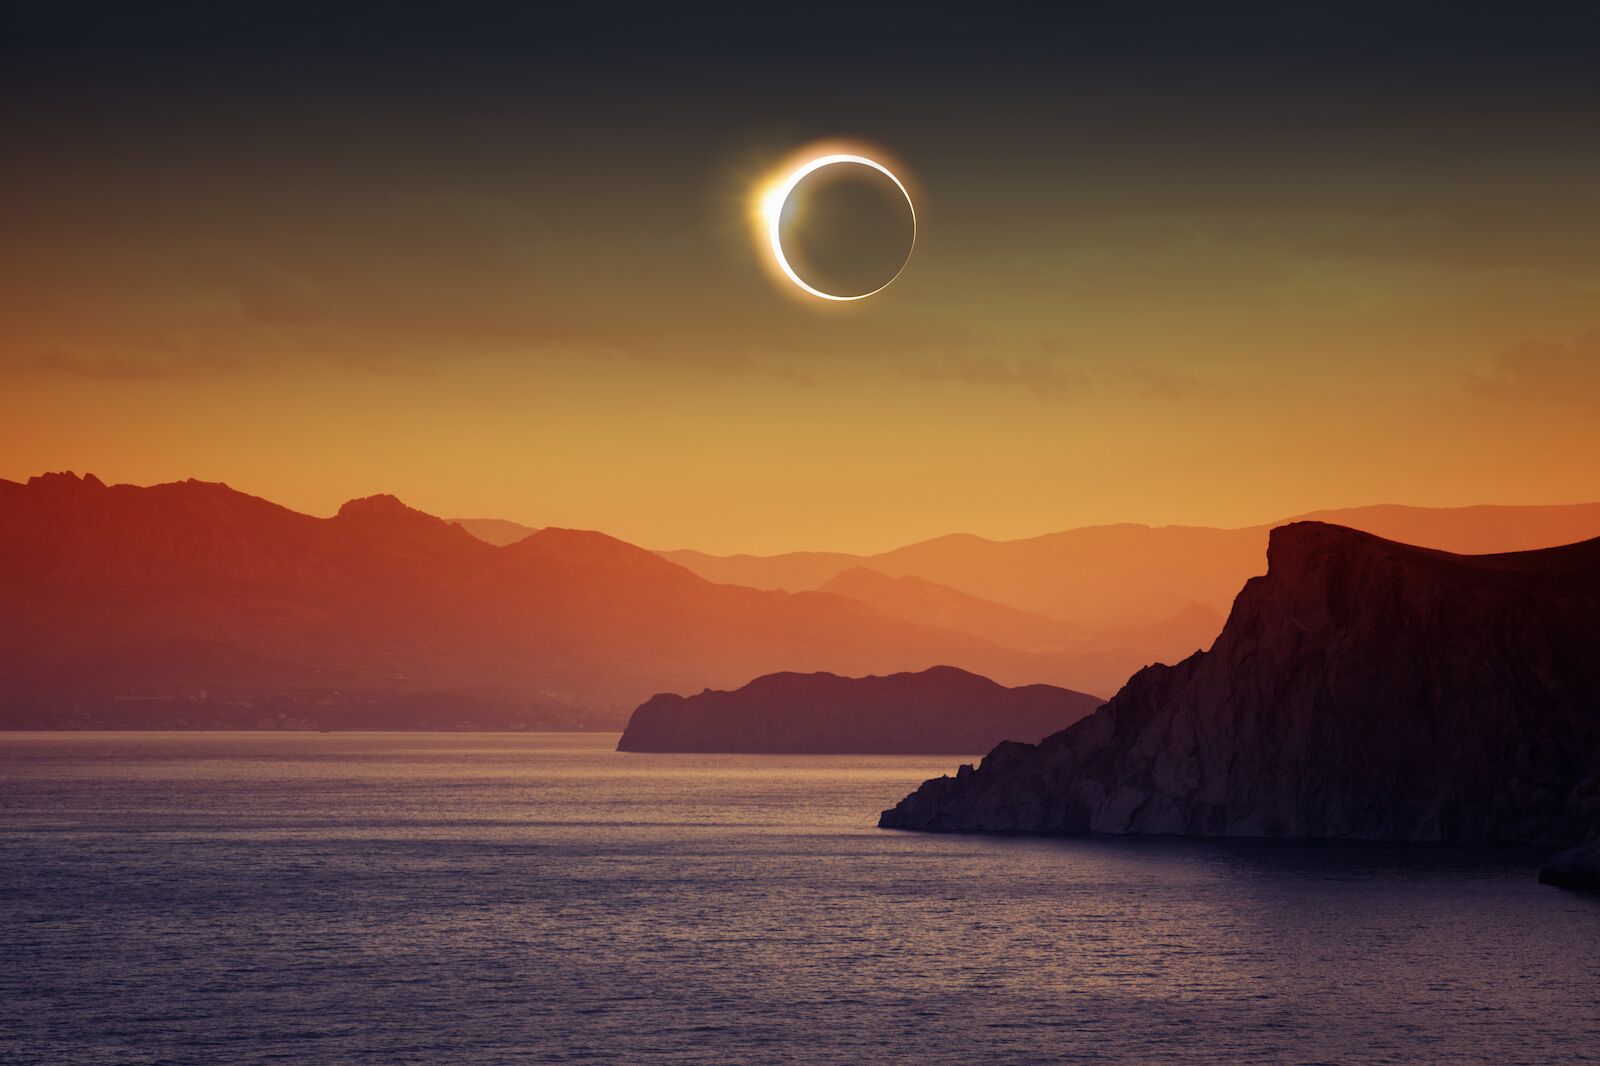 Solar eclipse on a cruise